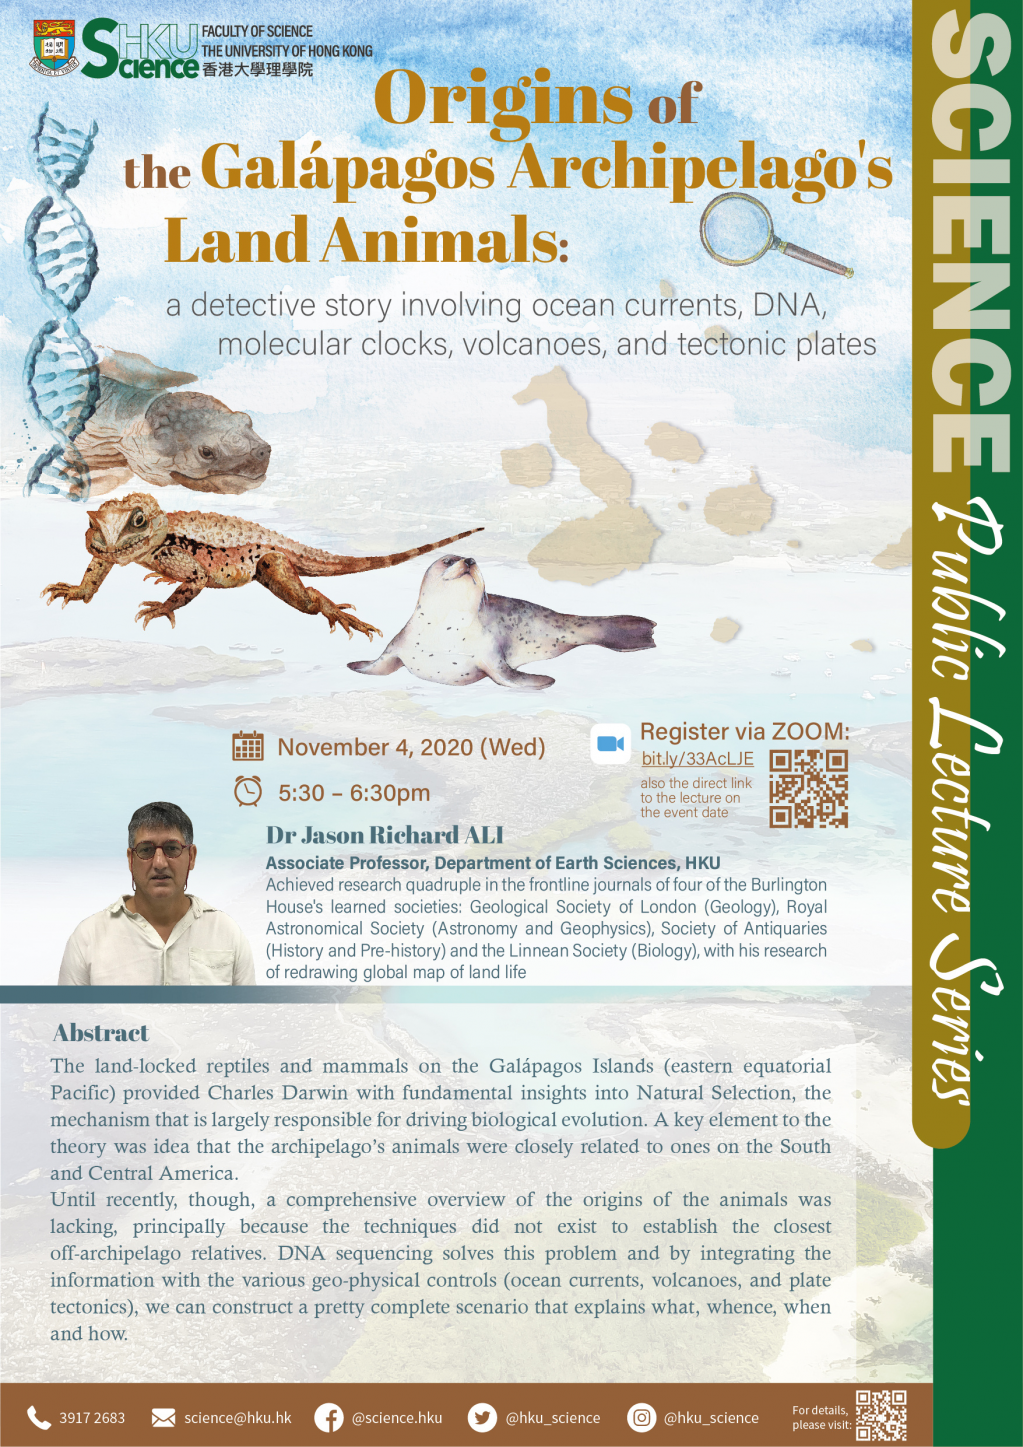 Science Public lecture@Zoom - Origins of the Galápagos Archipelago's Land Animals by Dr Jason Richard ALI, Department of Earth Sciences